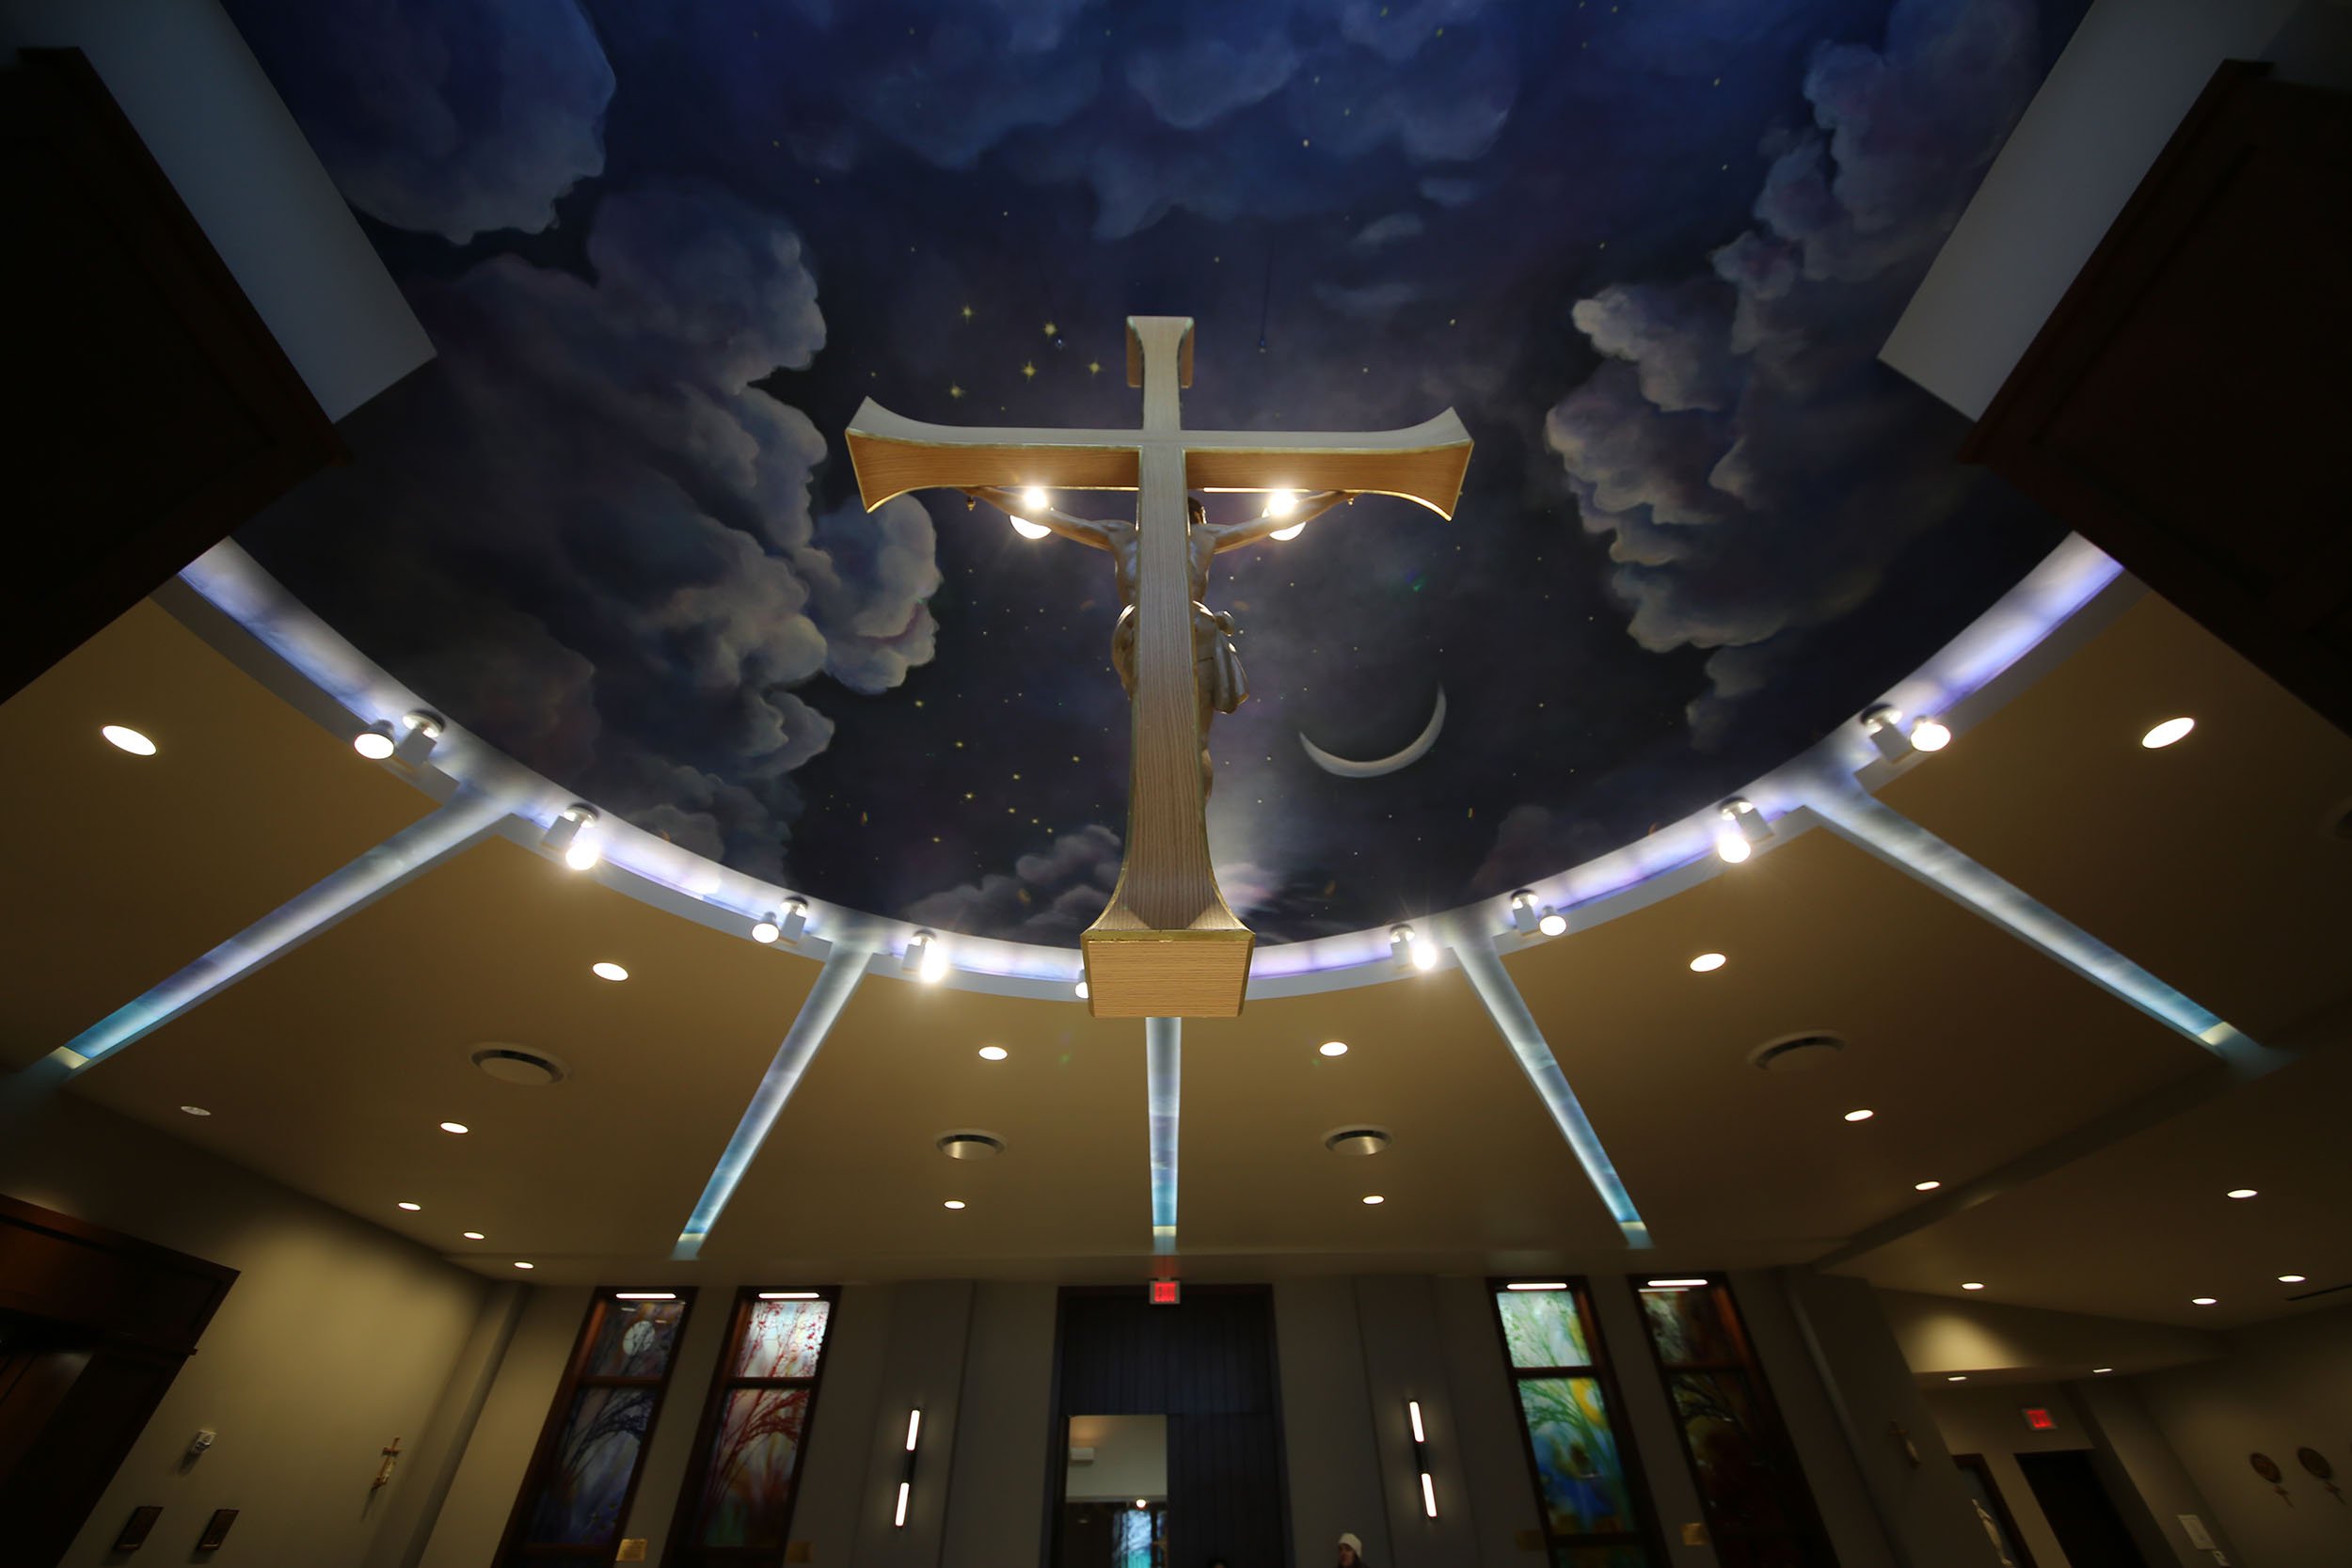 Divine Savior Holy Angels High School | Mother of Our Savior Chapel | Hand Painted Mural